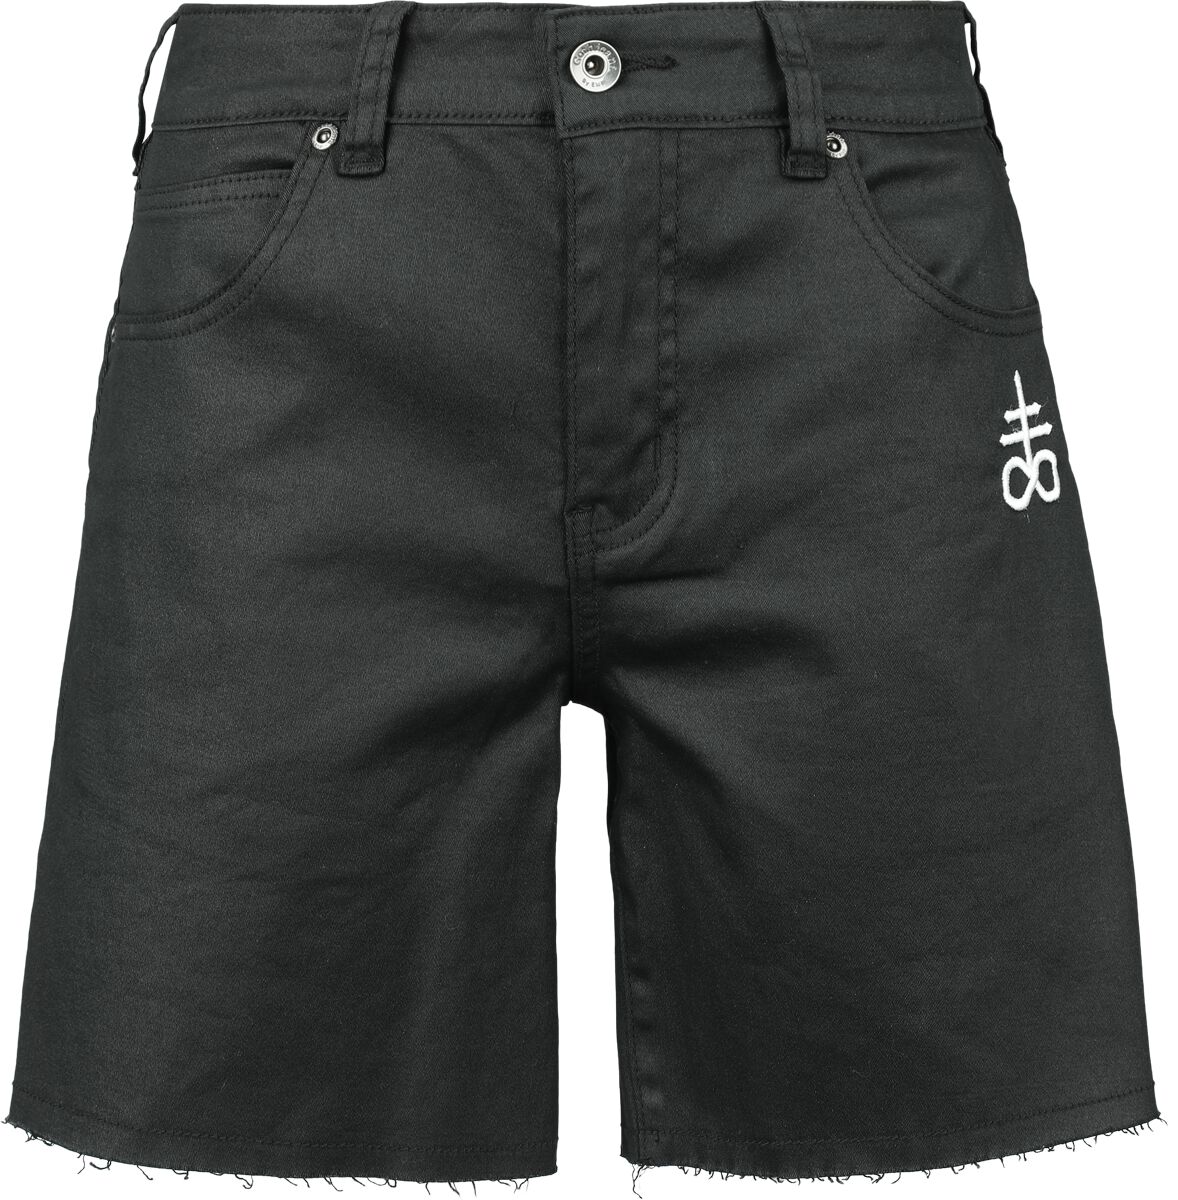 Black Blood by Gothicana Coated Shorts with Small Embroidery Short schwarz in 28